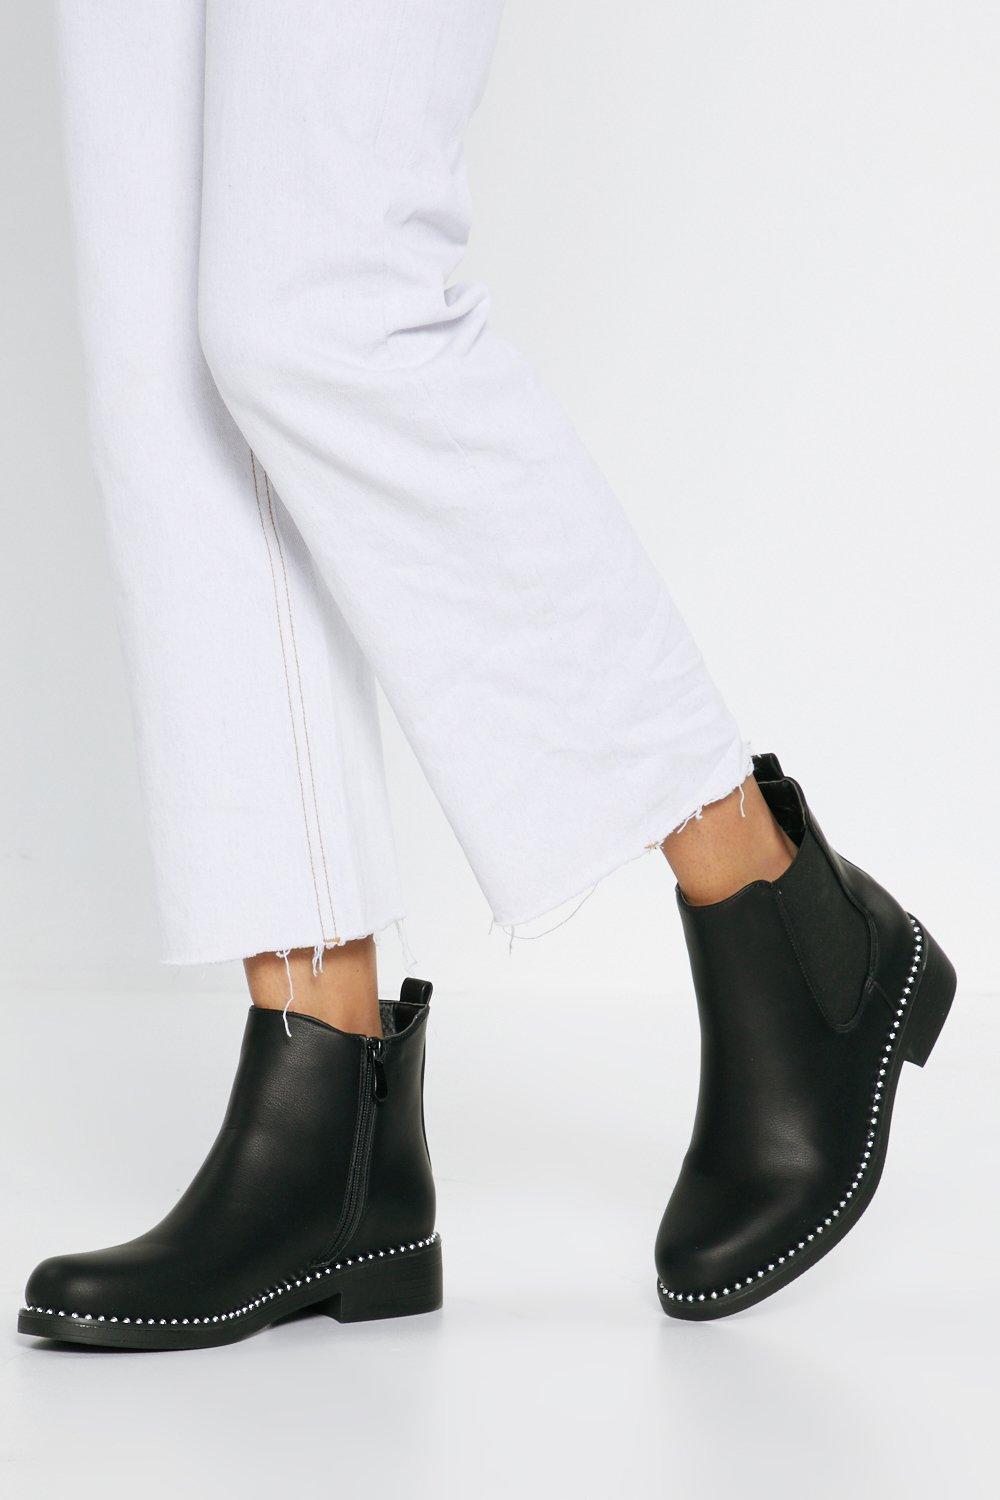 zara leather heeled ankle boots